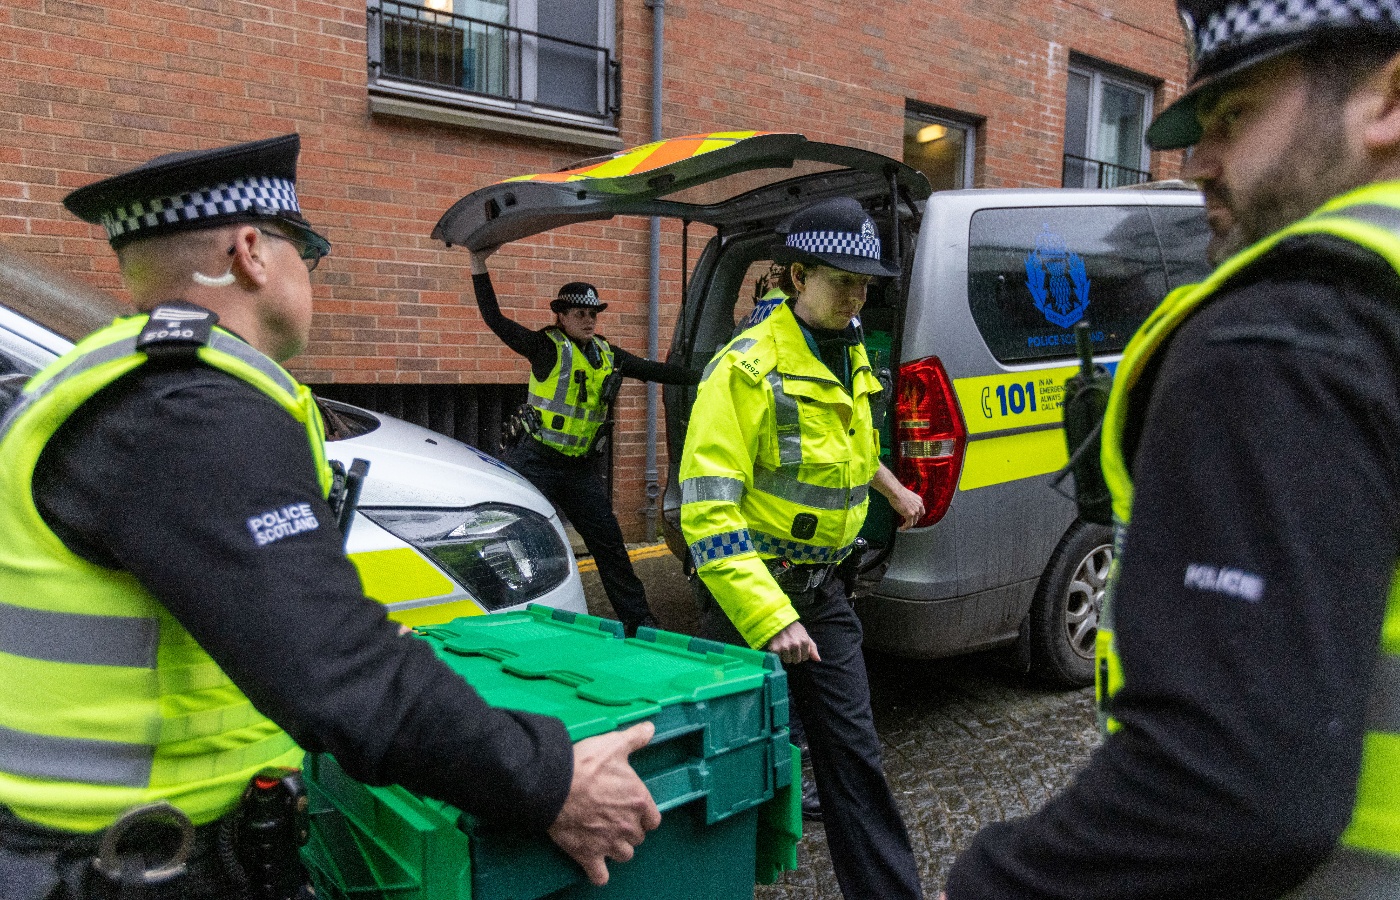 Police officers at the Scottish National Party's offices on April 5, 2023, in Edinburgh, after Peter Murrell, husband of former first minister Nicola Sturgeon and former chief executive of the SNP was arrested.